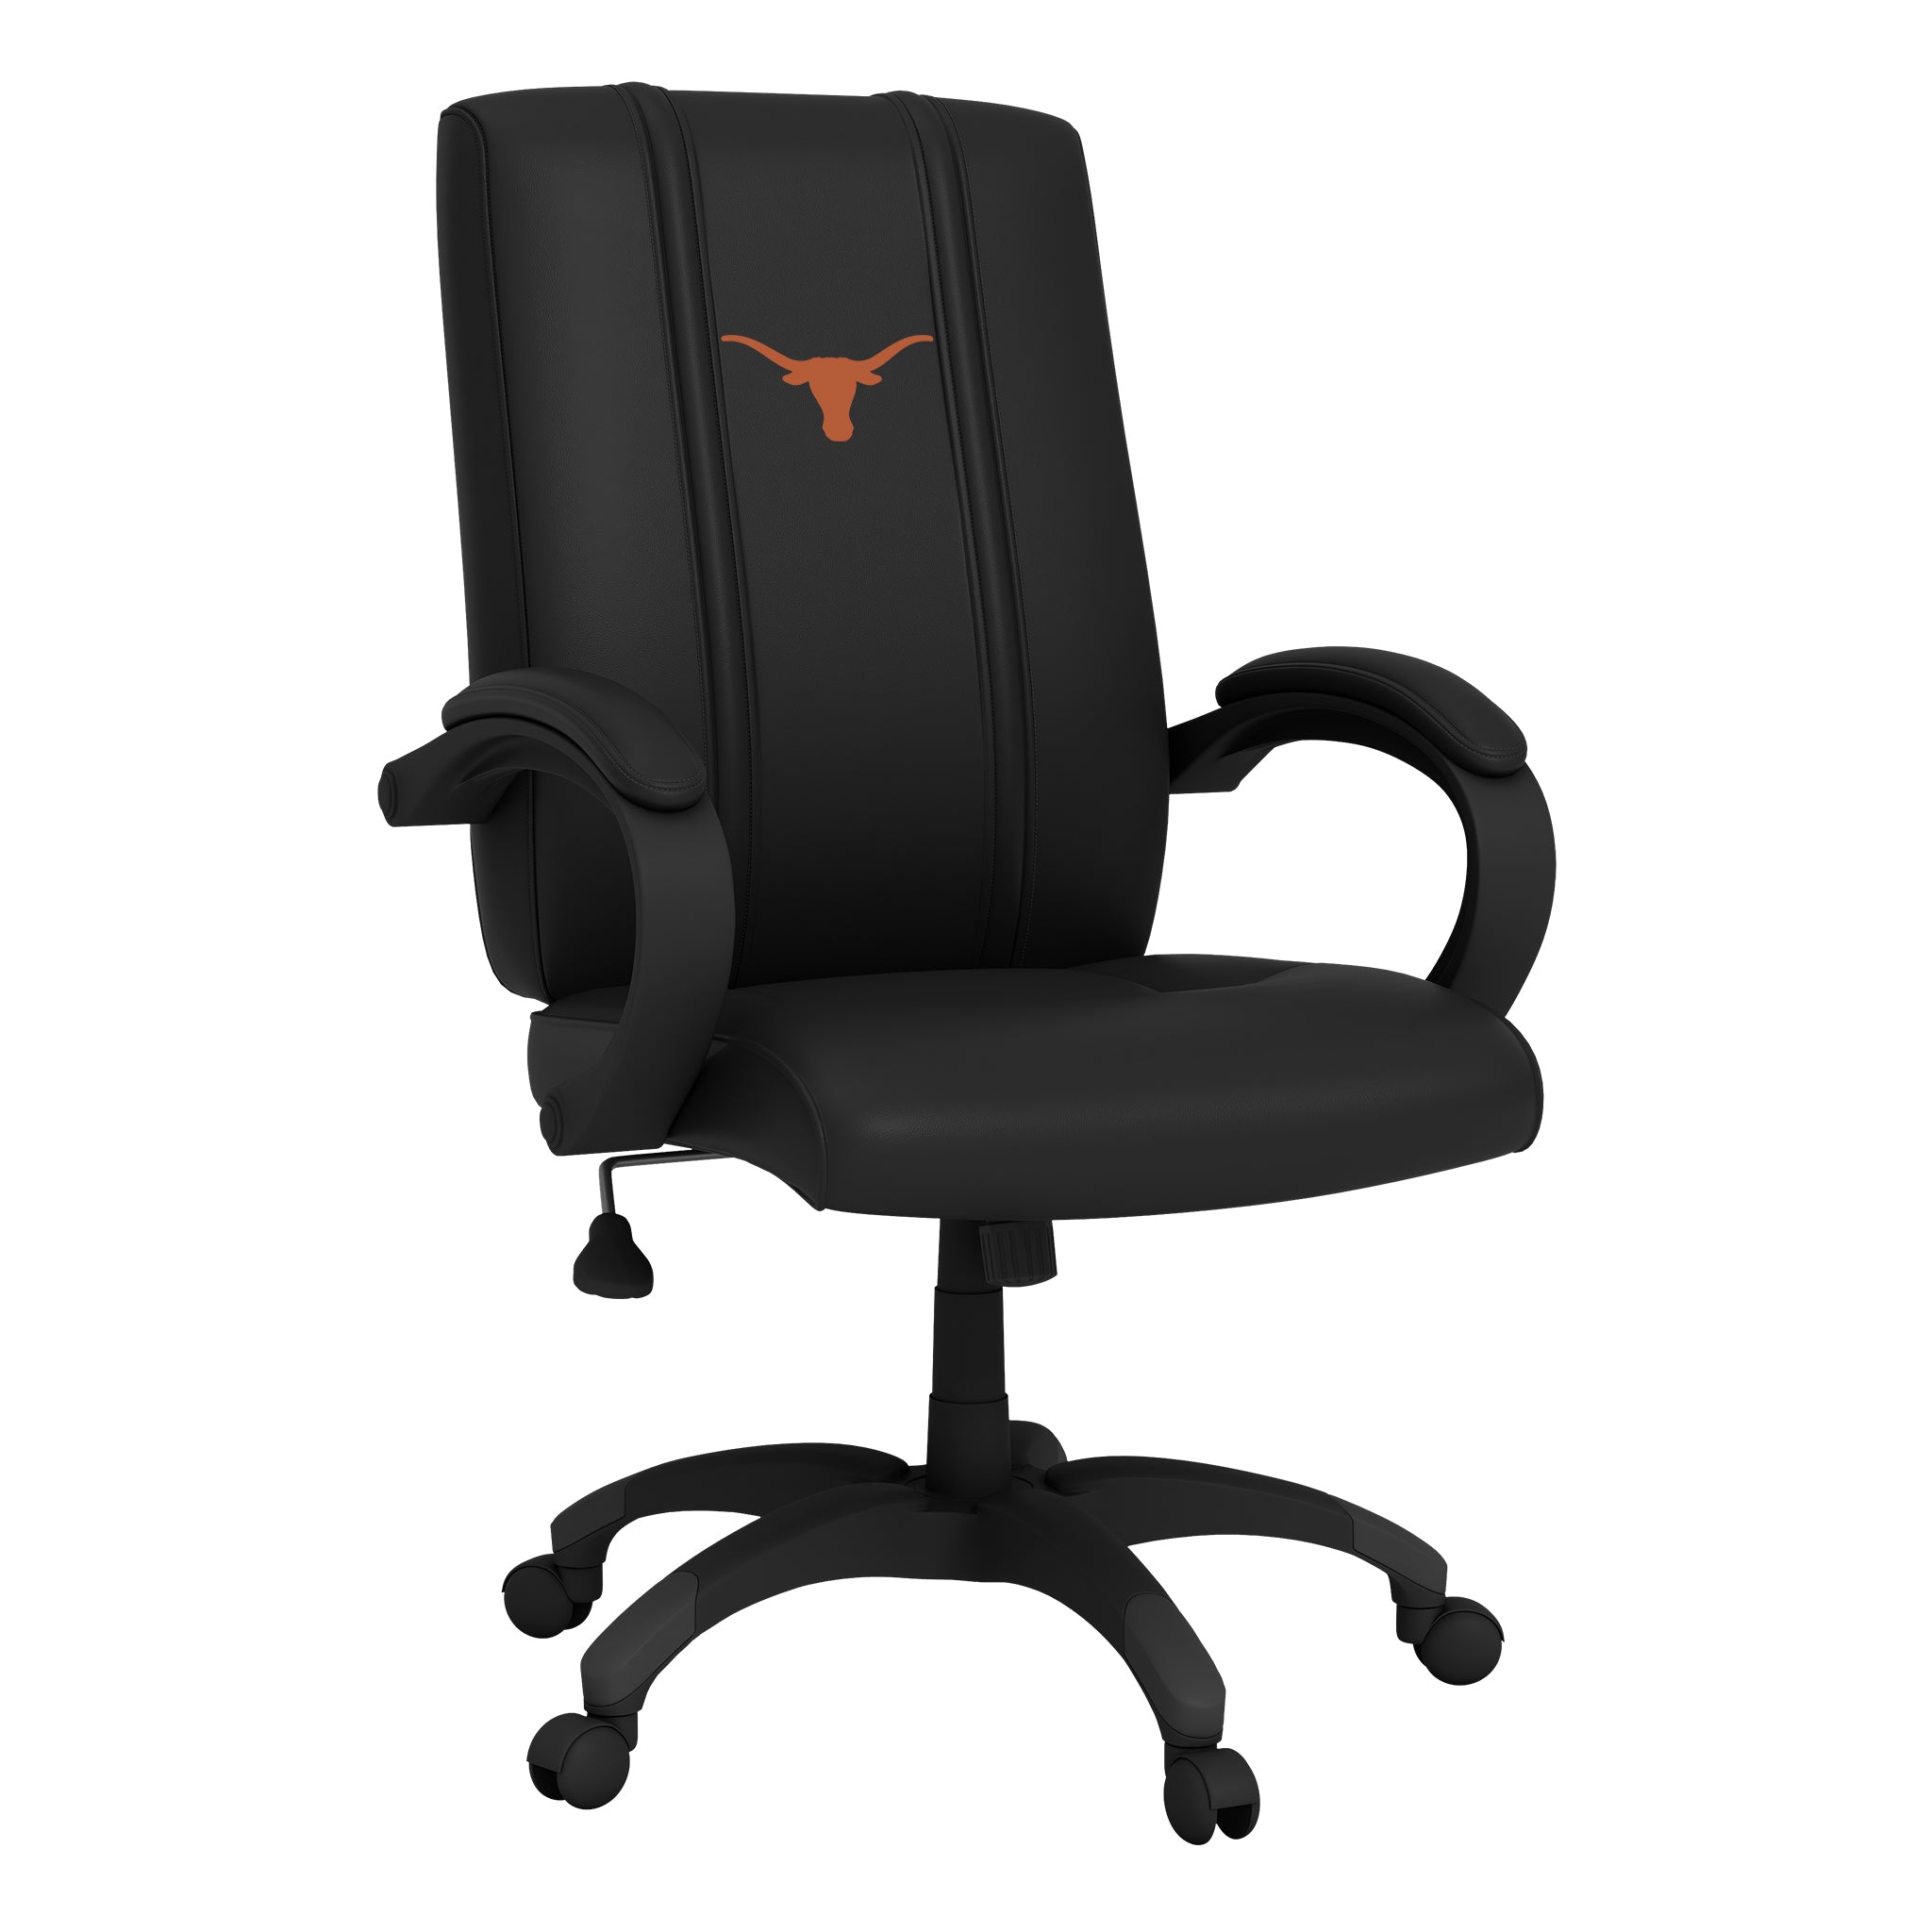 Texas Longhorns Office Chair 1000 with Texas Longhorns Primary